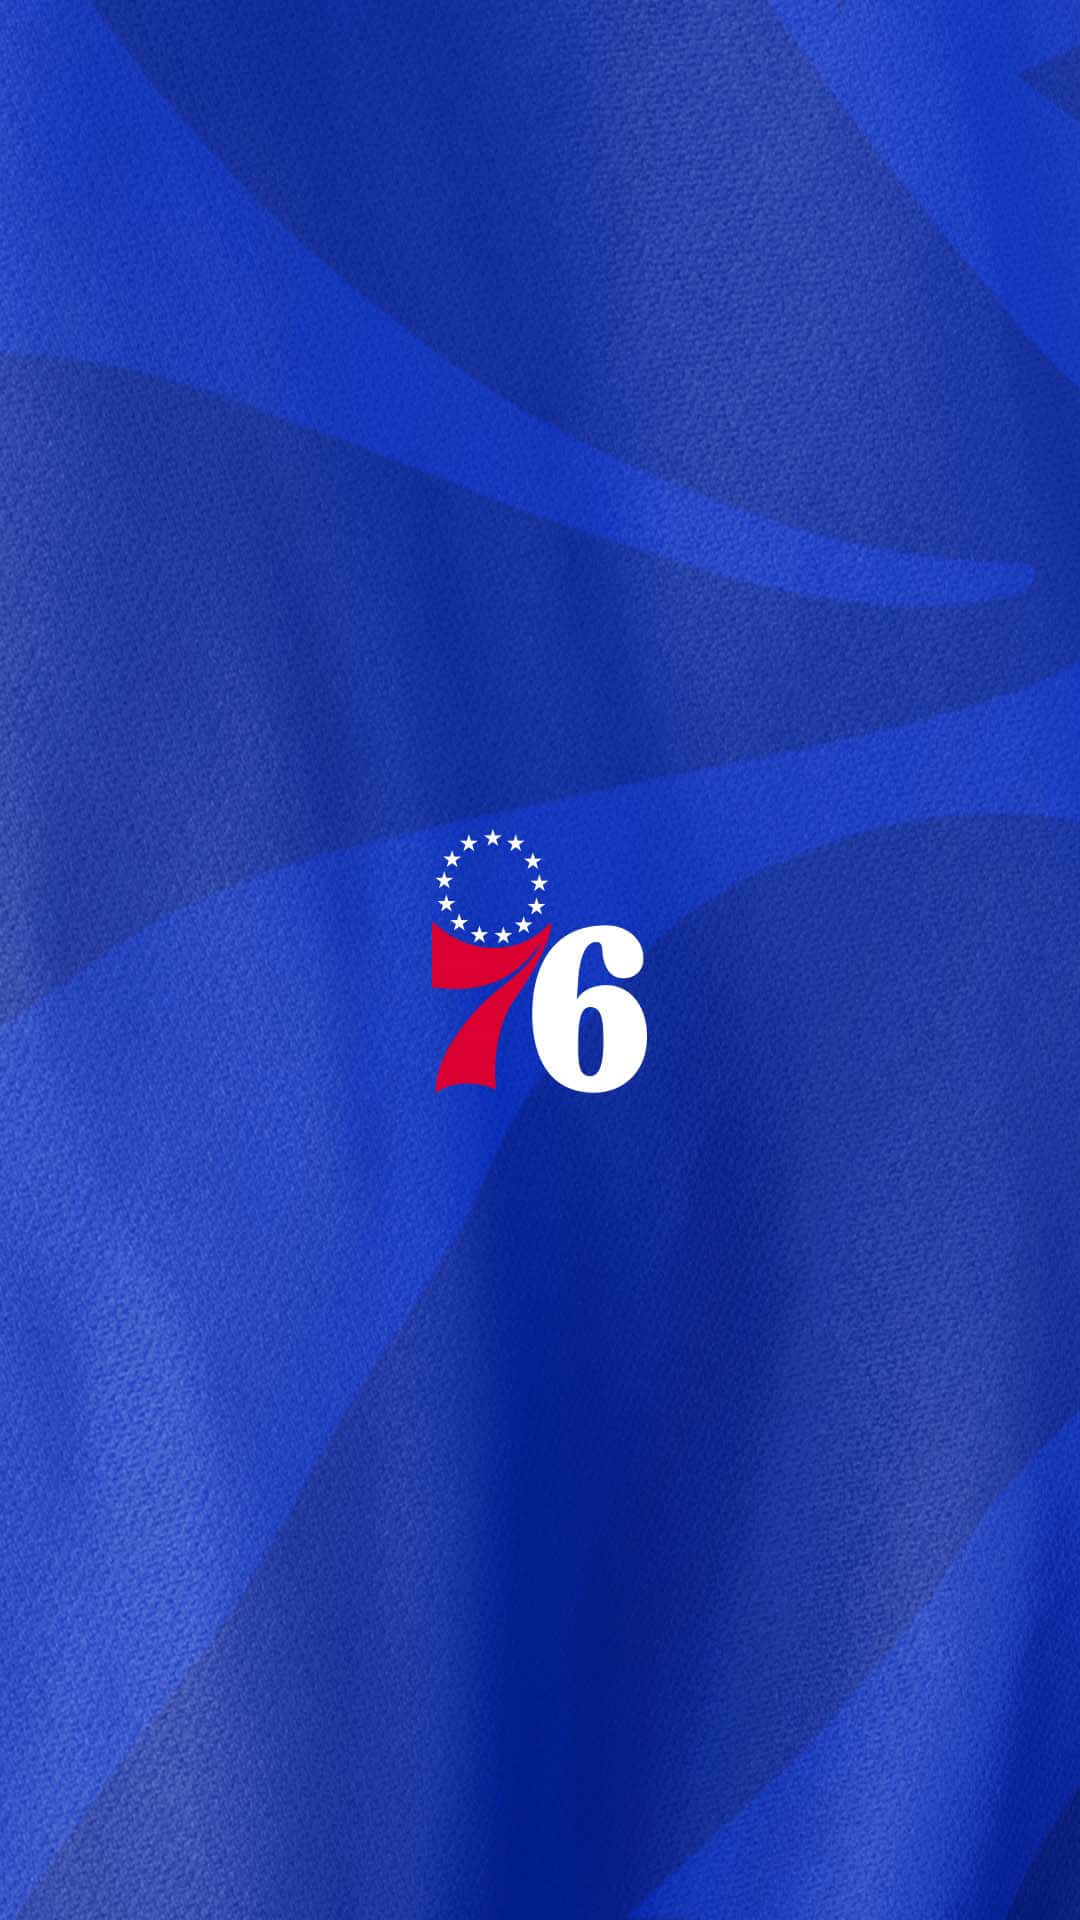 Get Ready for The Game with Philadelphia 76ers iPhone Cases Wallpaper